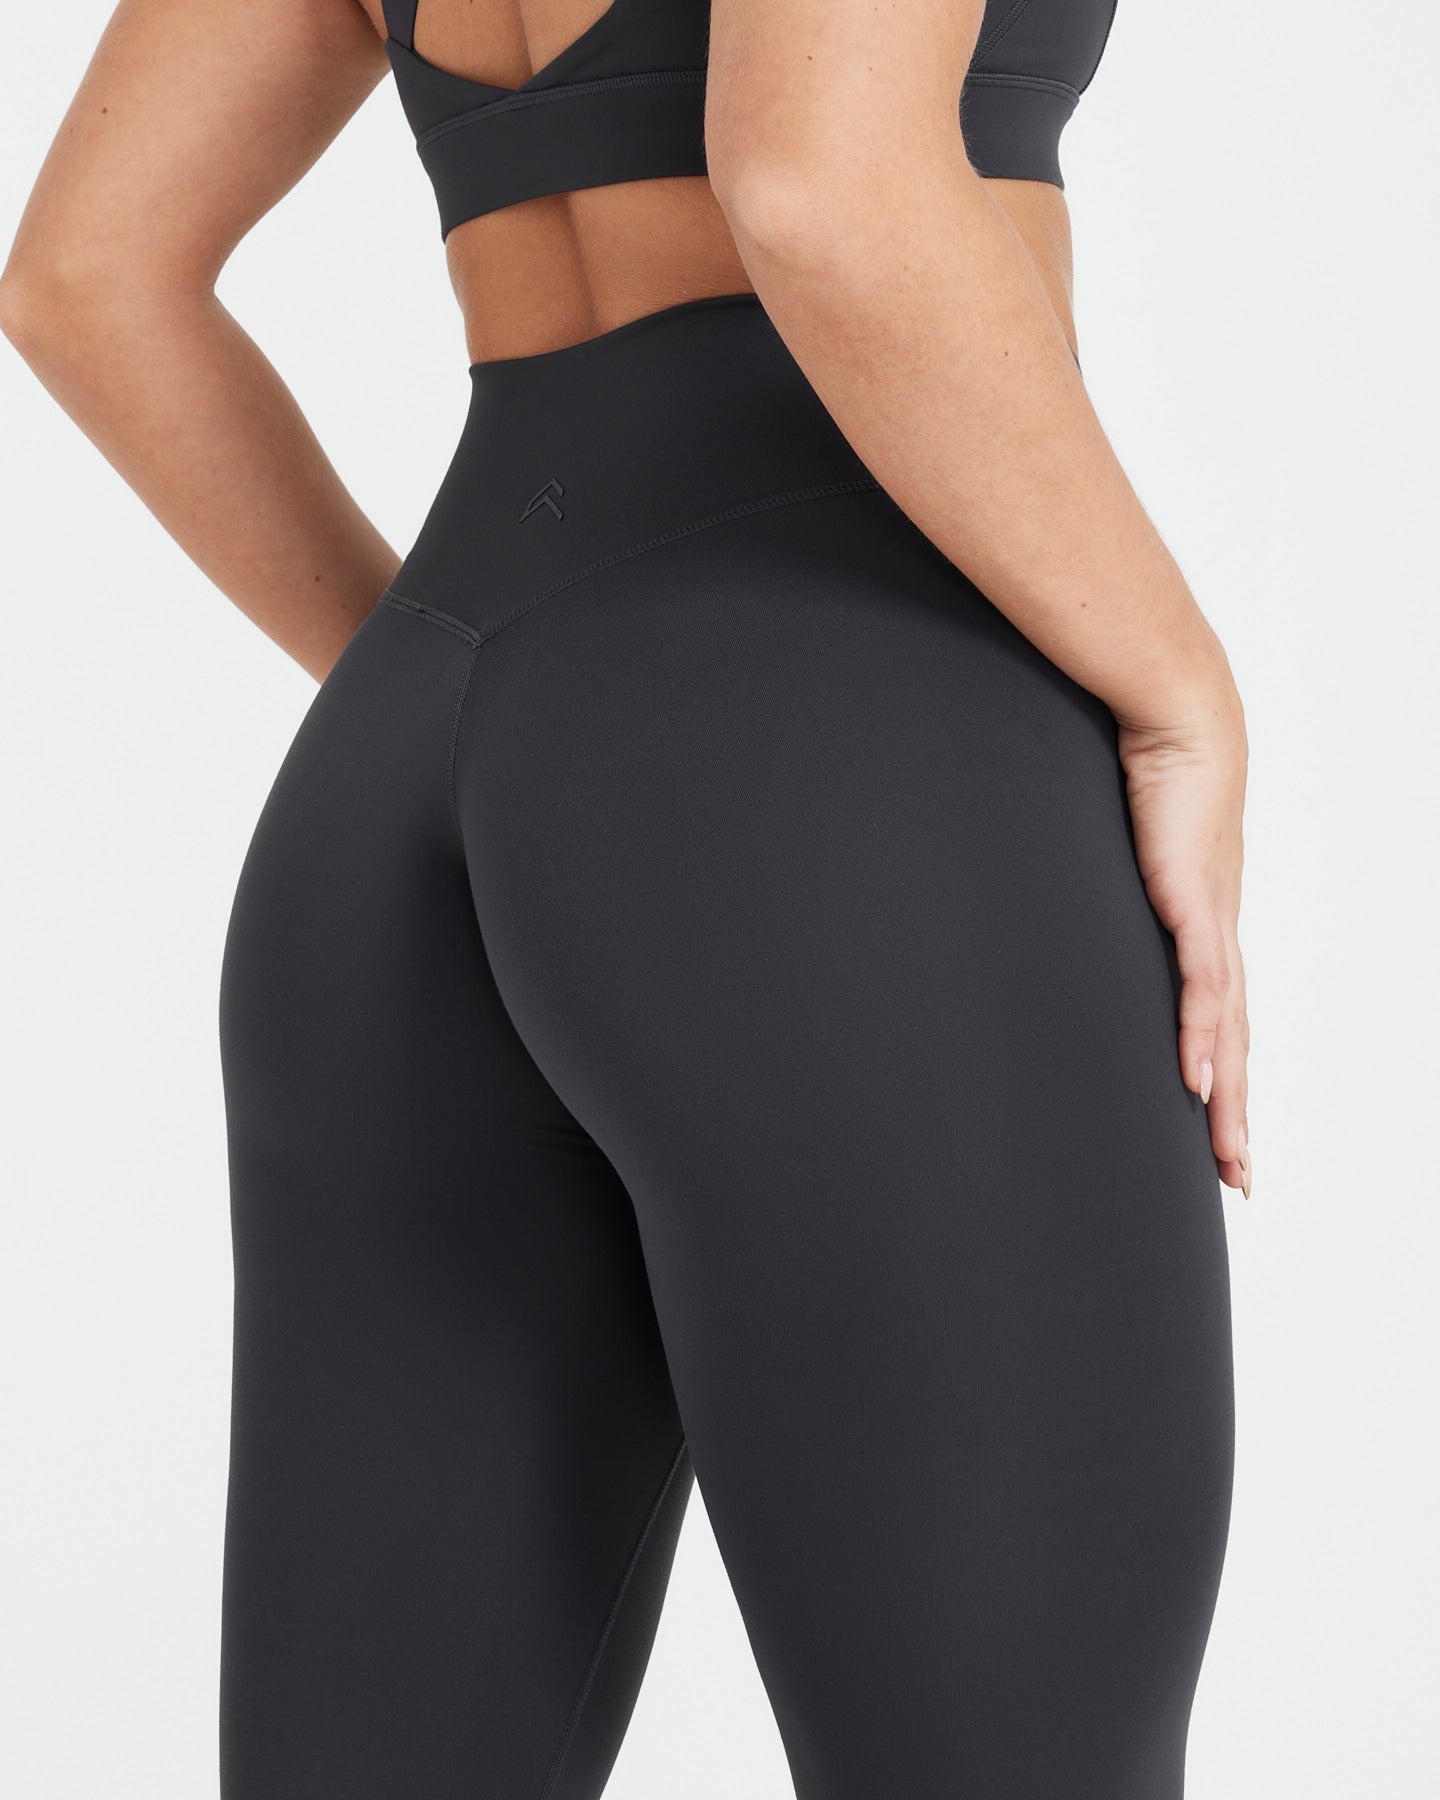 Coal Grey Leggings Women's - Available in Two Lengths | Oner Active US